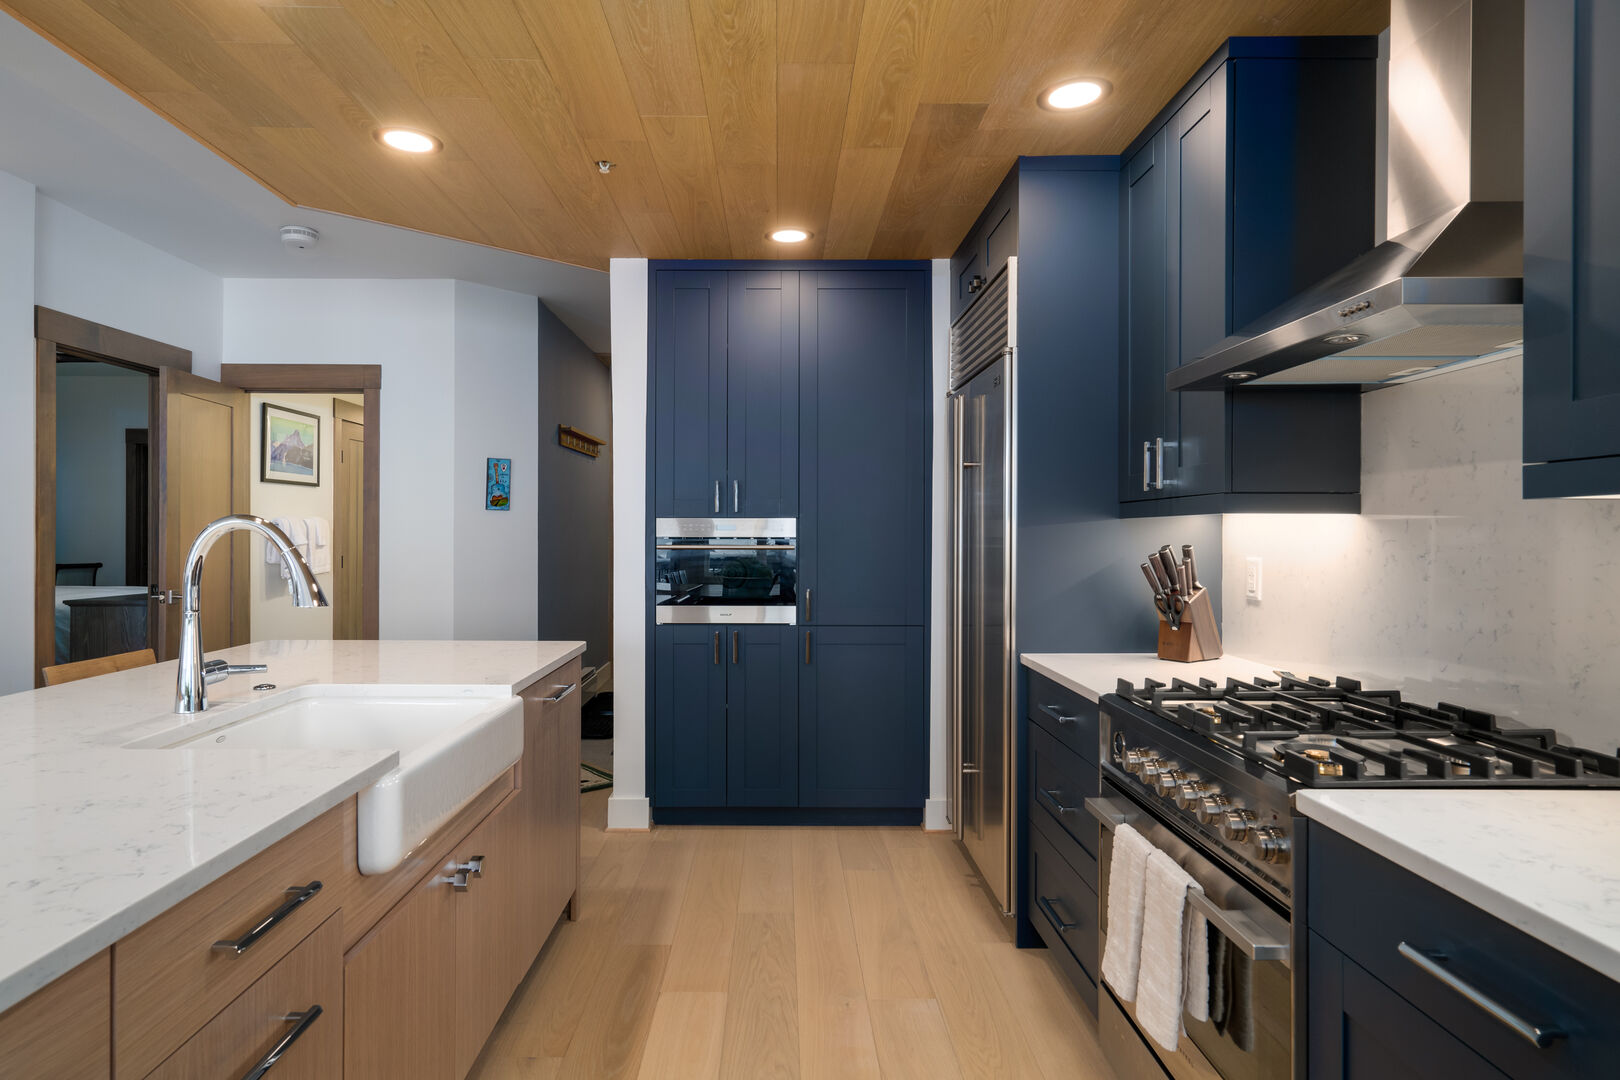 Custom blue cabinetry pops in our kitchen, below the new wood paneled ceiling.